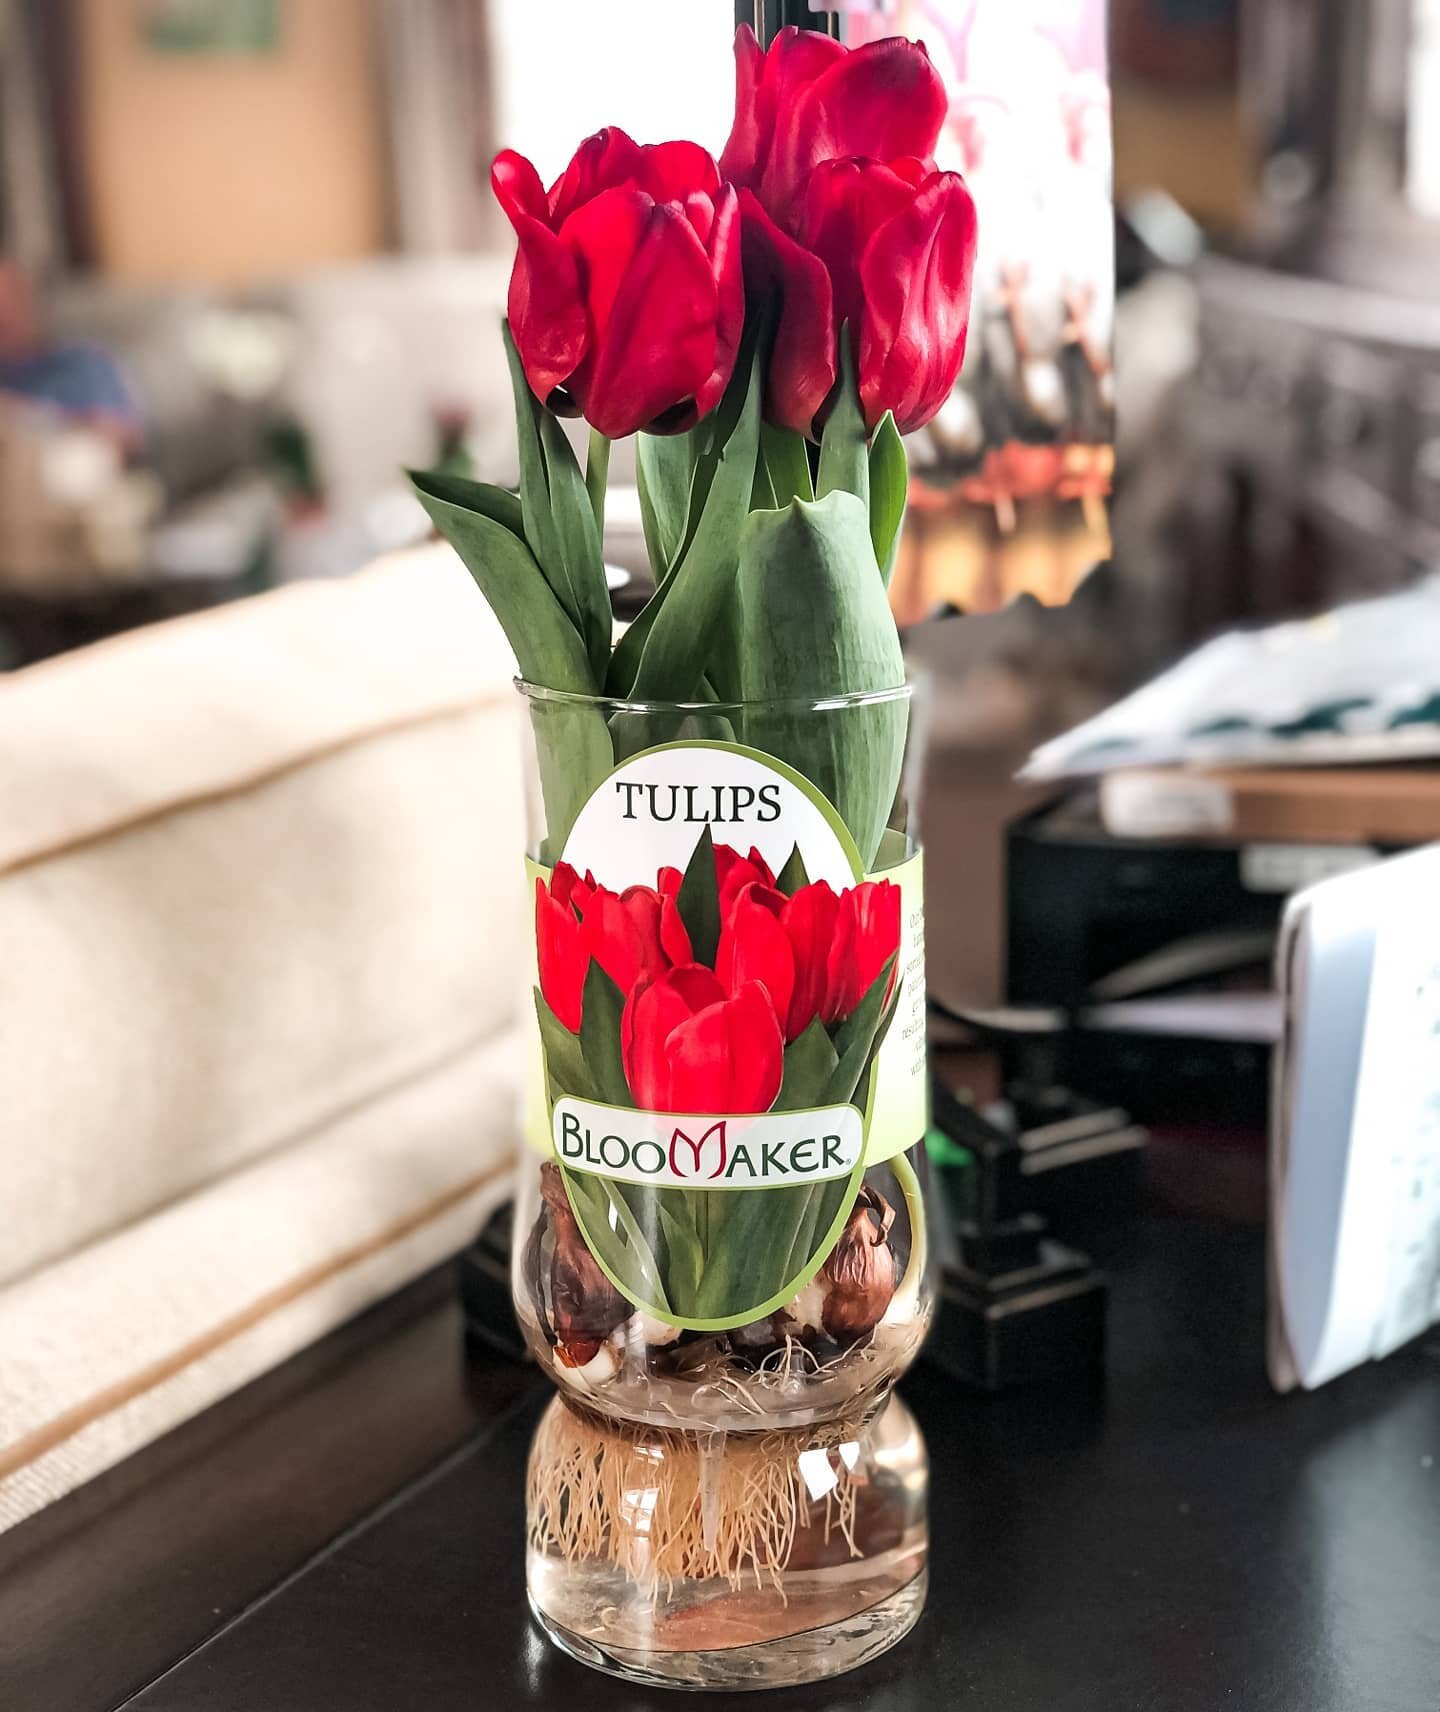 Flowers are restful to look at. They have neither emotions nor conflicts ❤
⠀
- Sigmund Freud
⠀
Where to find our #longlifetulips? Head to the 'Find Us' section on our website bloomaker.com. Check with your local store first to see if they carry Bloom